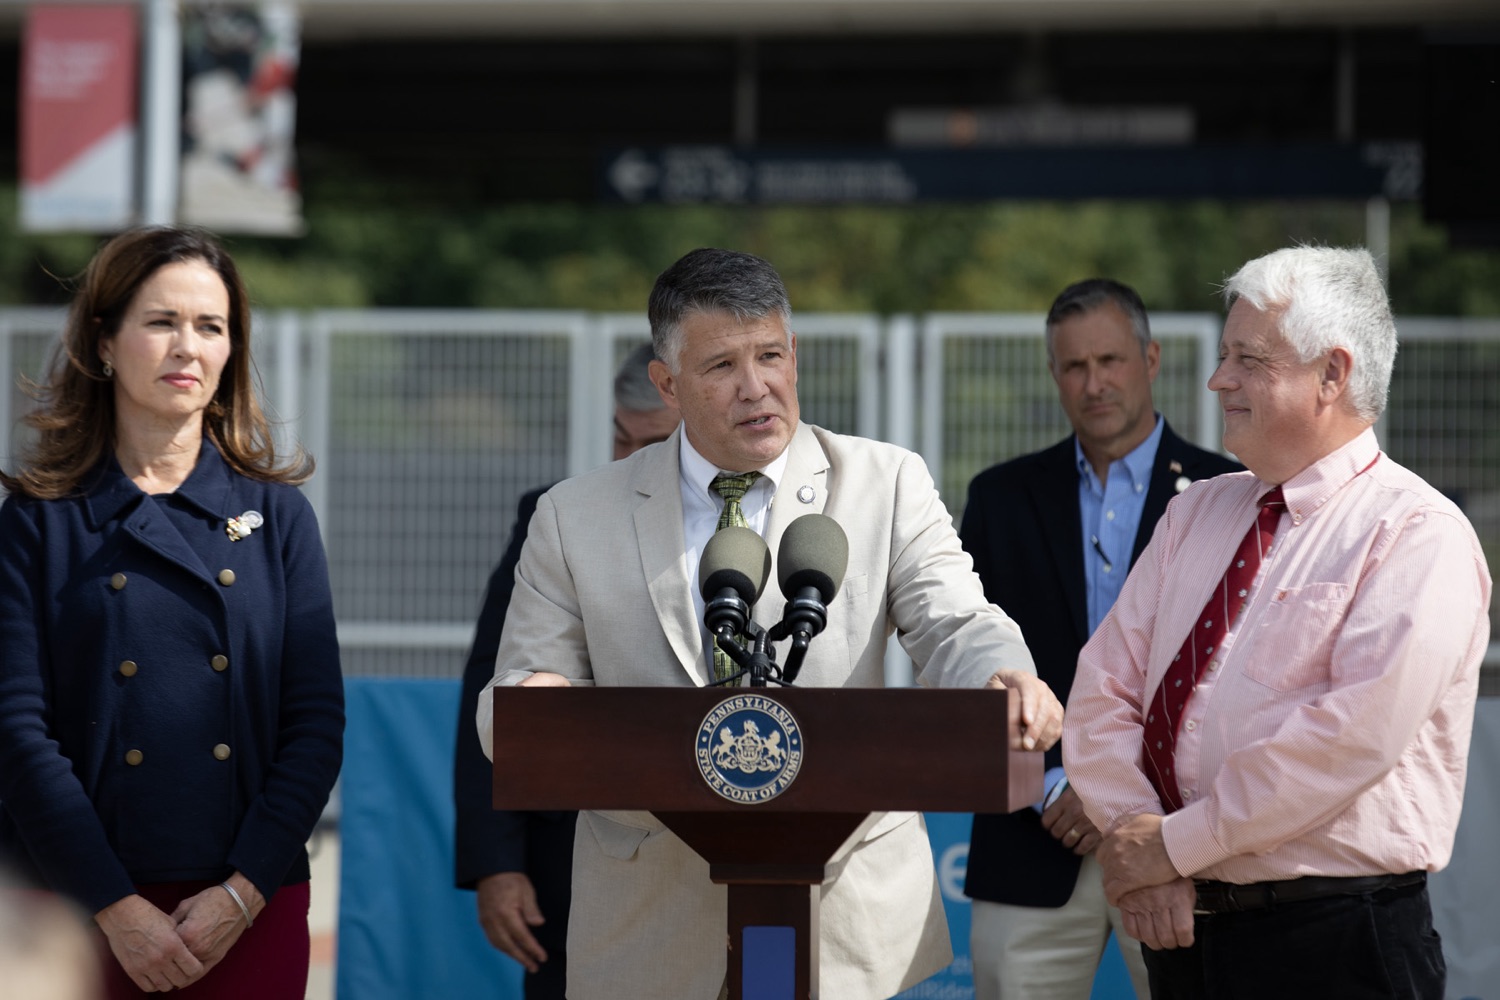 Secretaries from the Pennsylvania Departments of Revenue and Aging will visit a Senior Health Fair to speak with older Pennsylvanians about the Shapiro Administration's major expansion of the Property Tax/Rent Rebate (PTRR) program. Pictured here is State Representative Jim Haddock, delivering remarks at their event in Moosic, Pennsylvania.<br><a href="https://filesource.amperwave.net/commonwealthofpa/photo/23734_pda_ptrr_JP_27.jpg" target="_blank">⇣ Download Photo</a>